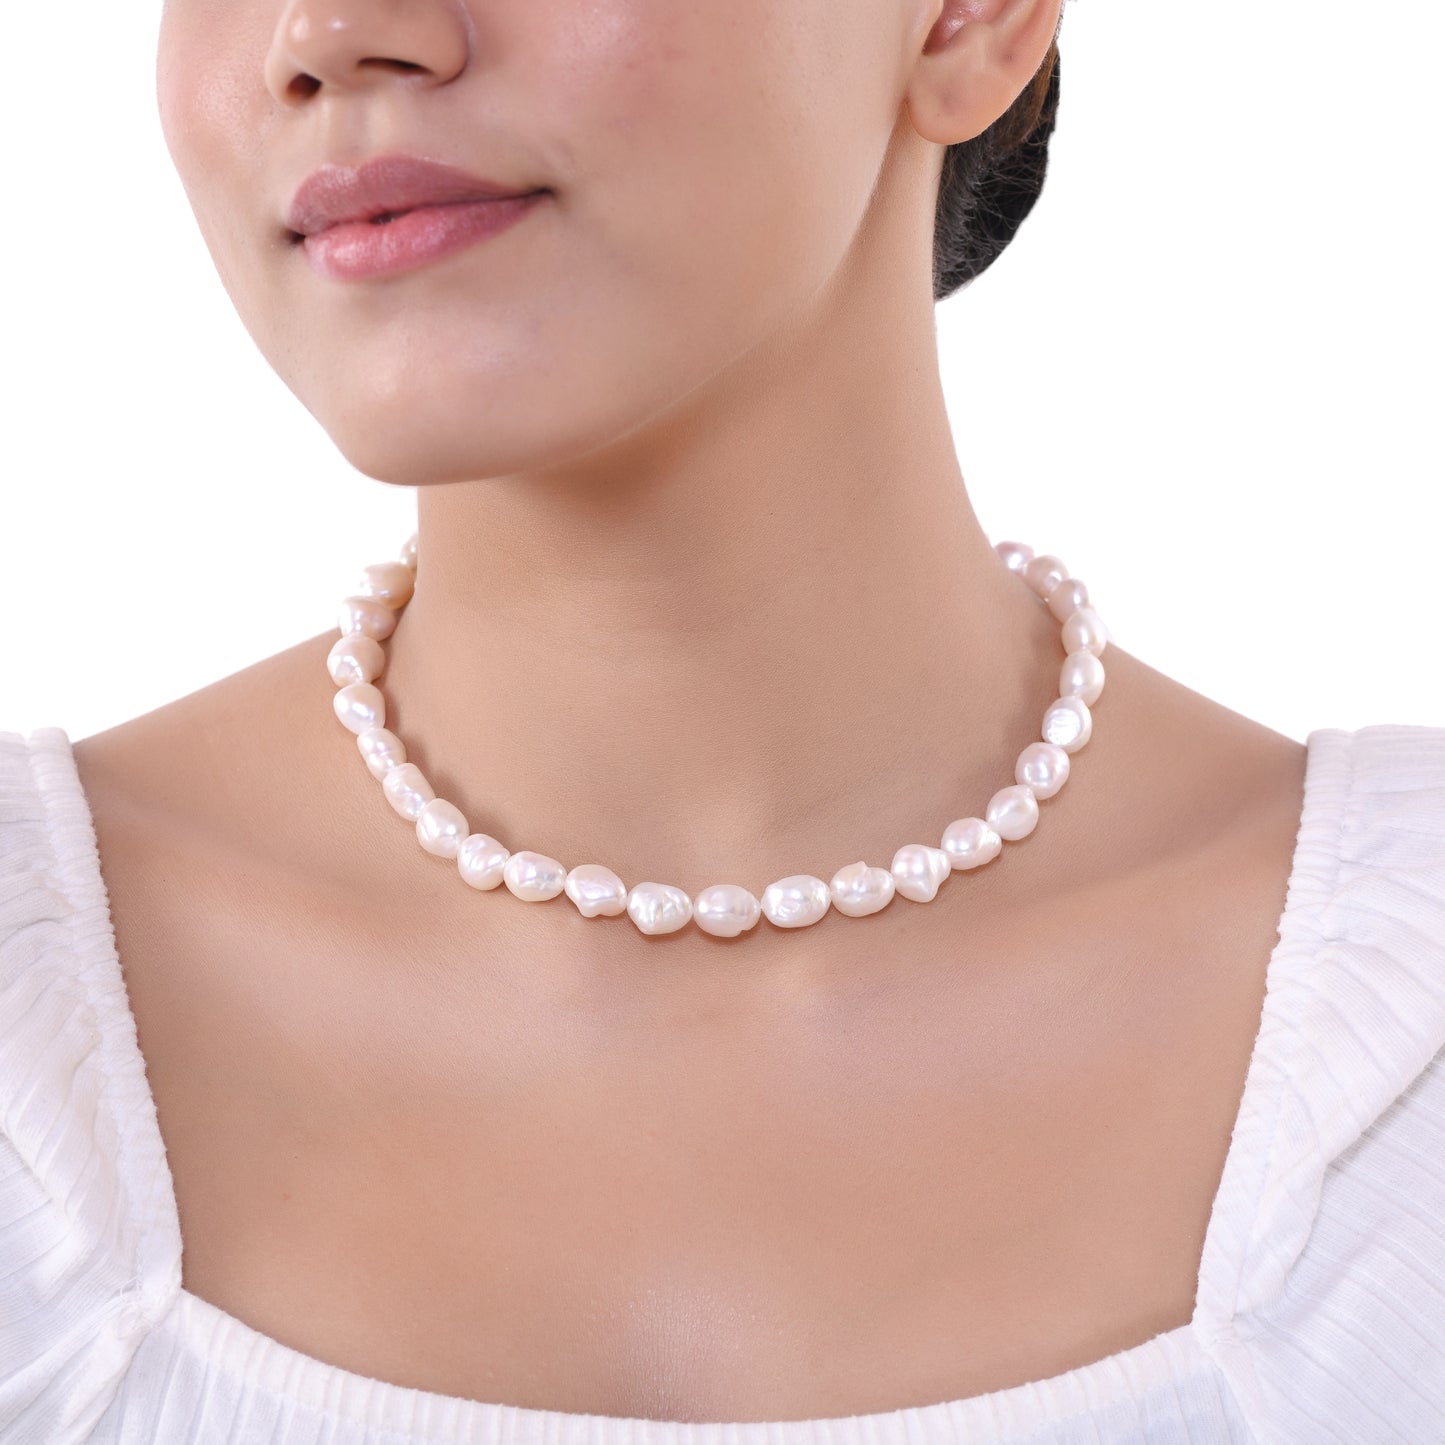 Timeless Natural Baroque Pearl Necklace| 925 Silver - From Purl Purl